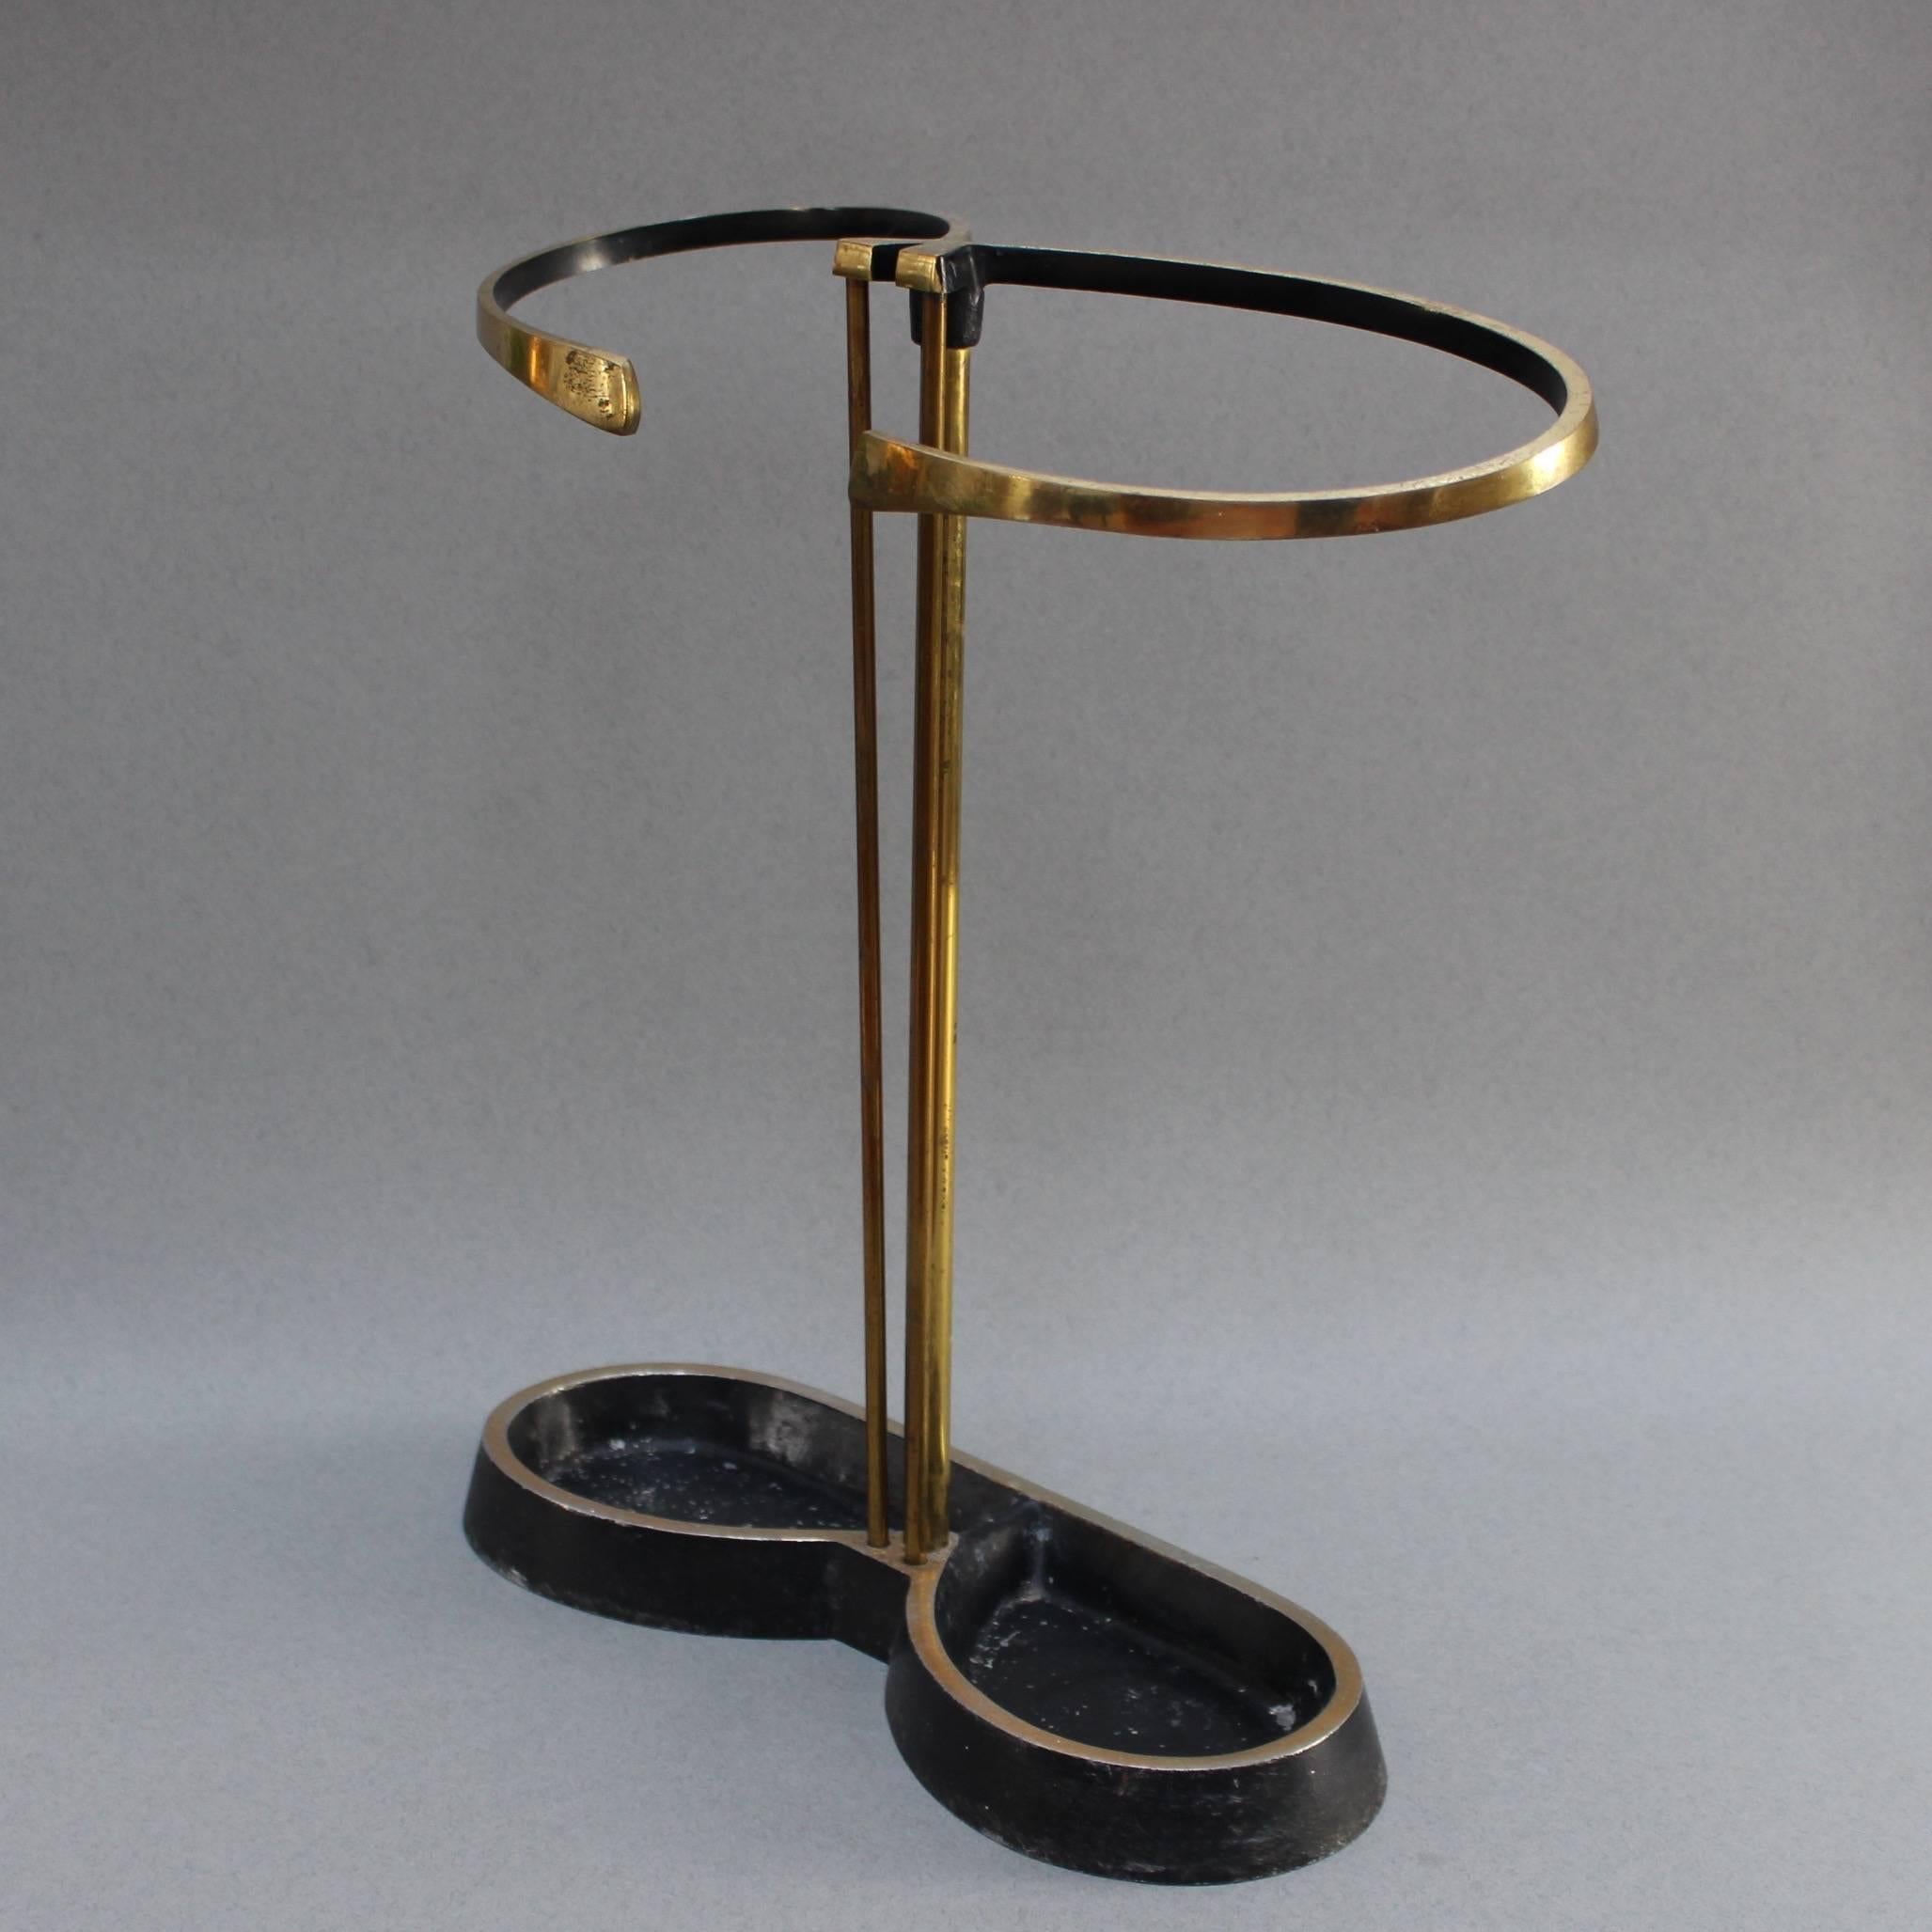 Cast iron and tubular brass umbrella stand from Austria, circa 1950s. Beautifully curvaceous design for those who love characterful midcentury vintage. This particular umbrella stand is showing distinctive signs of age and wear which add to its